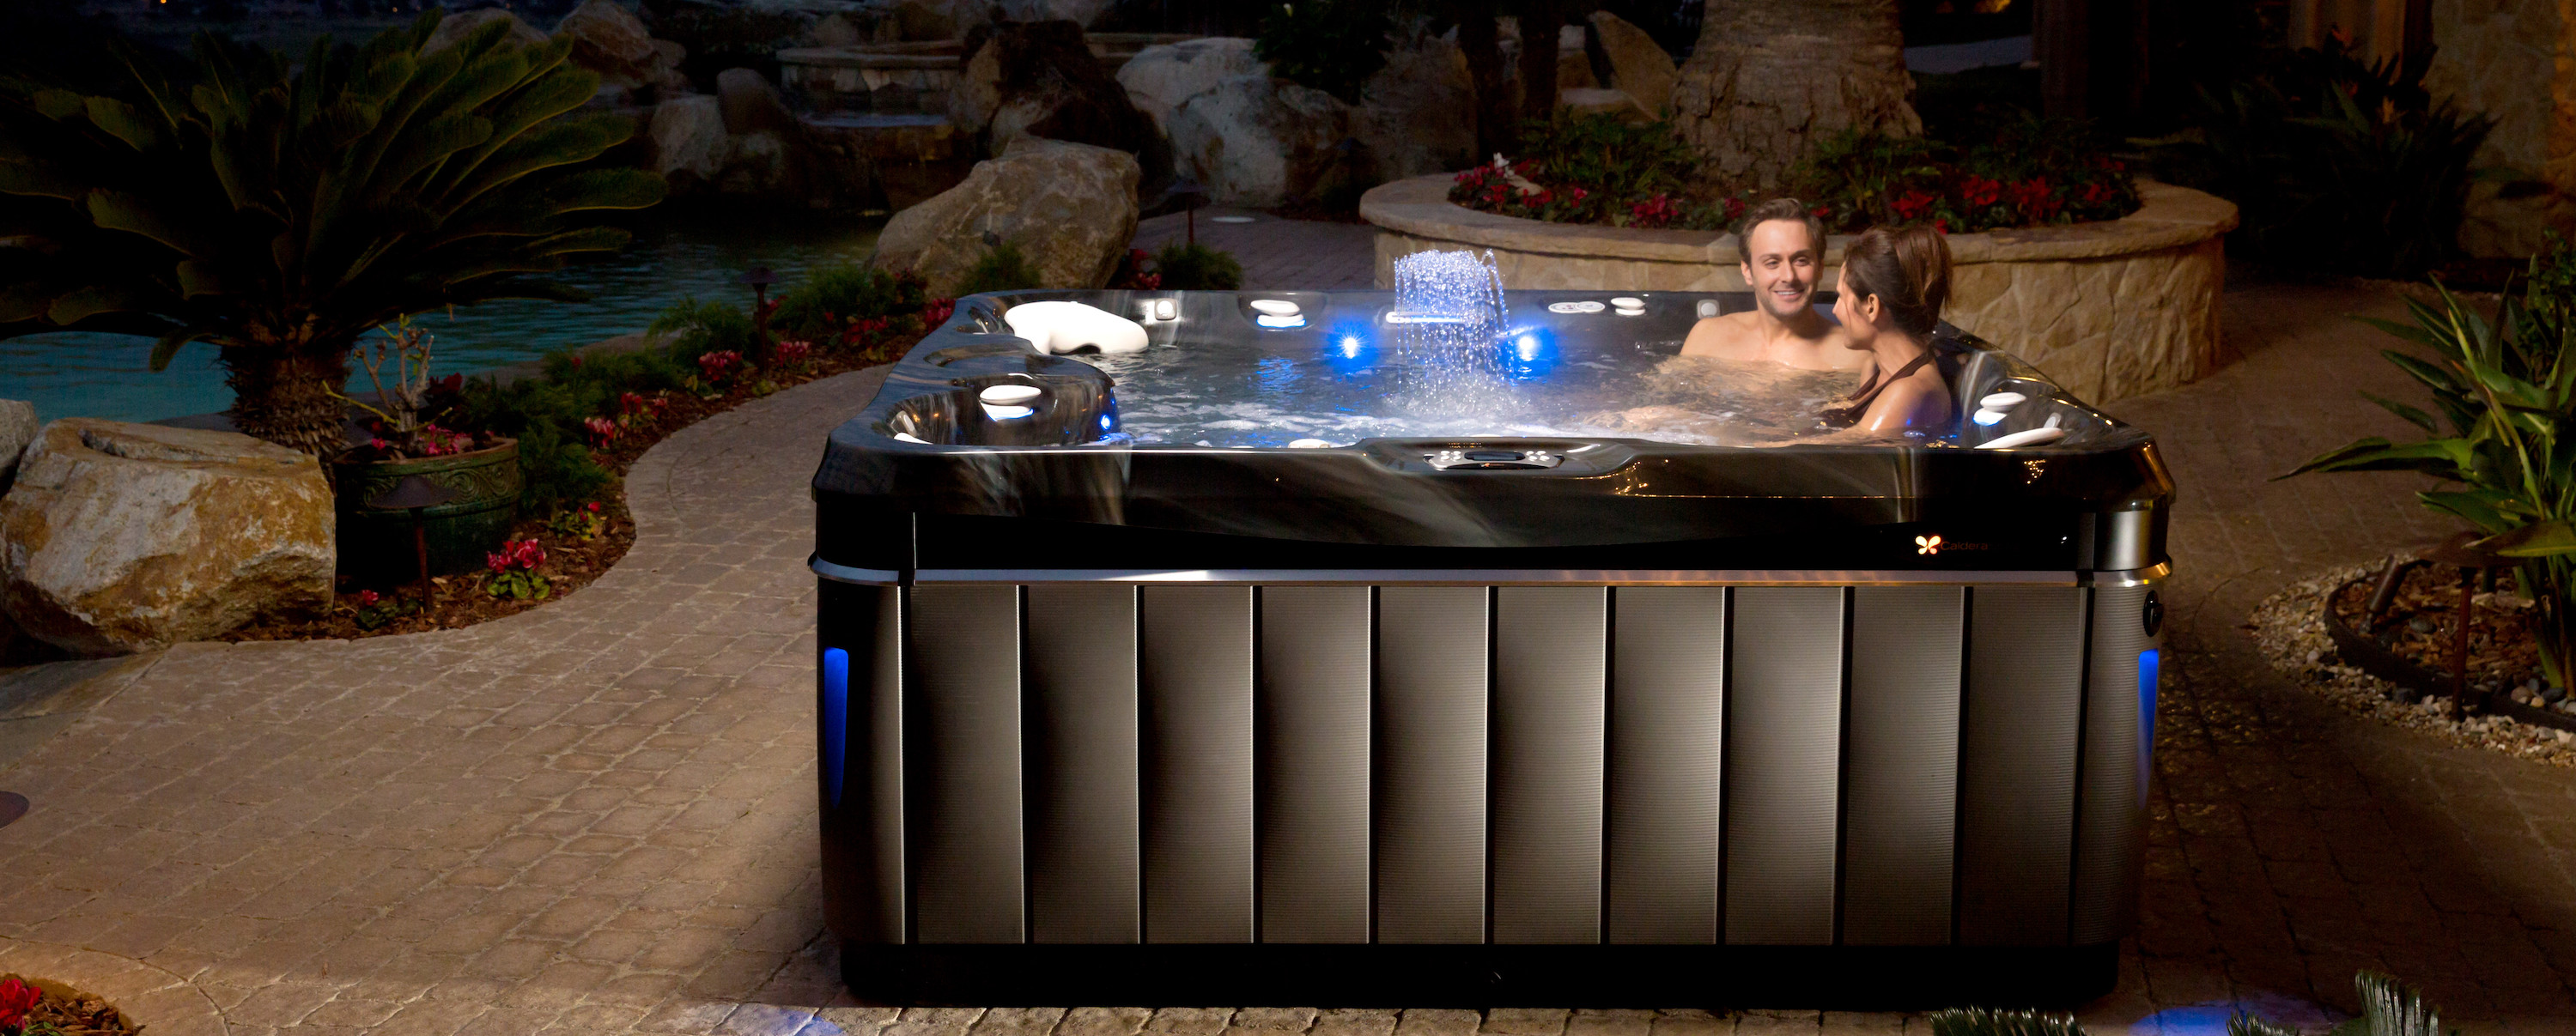 Jacuzzi Vs Hot Tub Vs Spa What S The Difference Caldera Spas